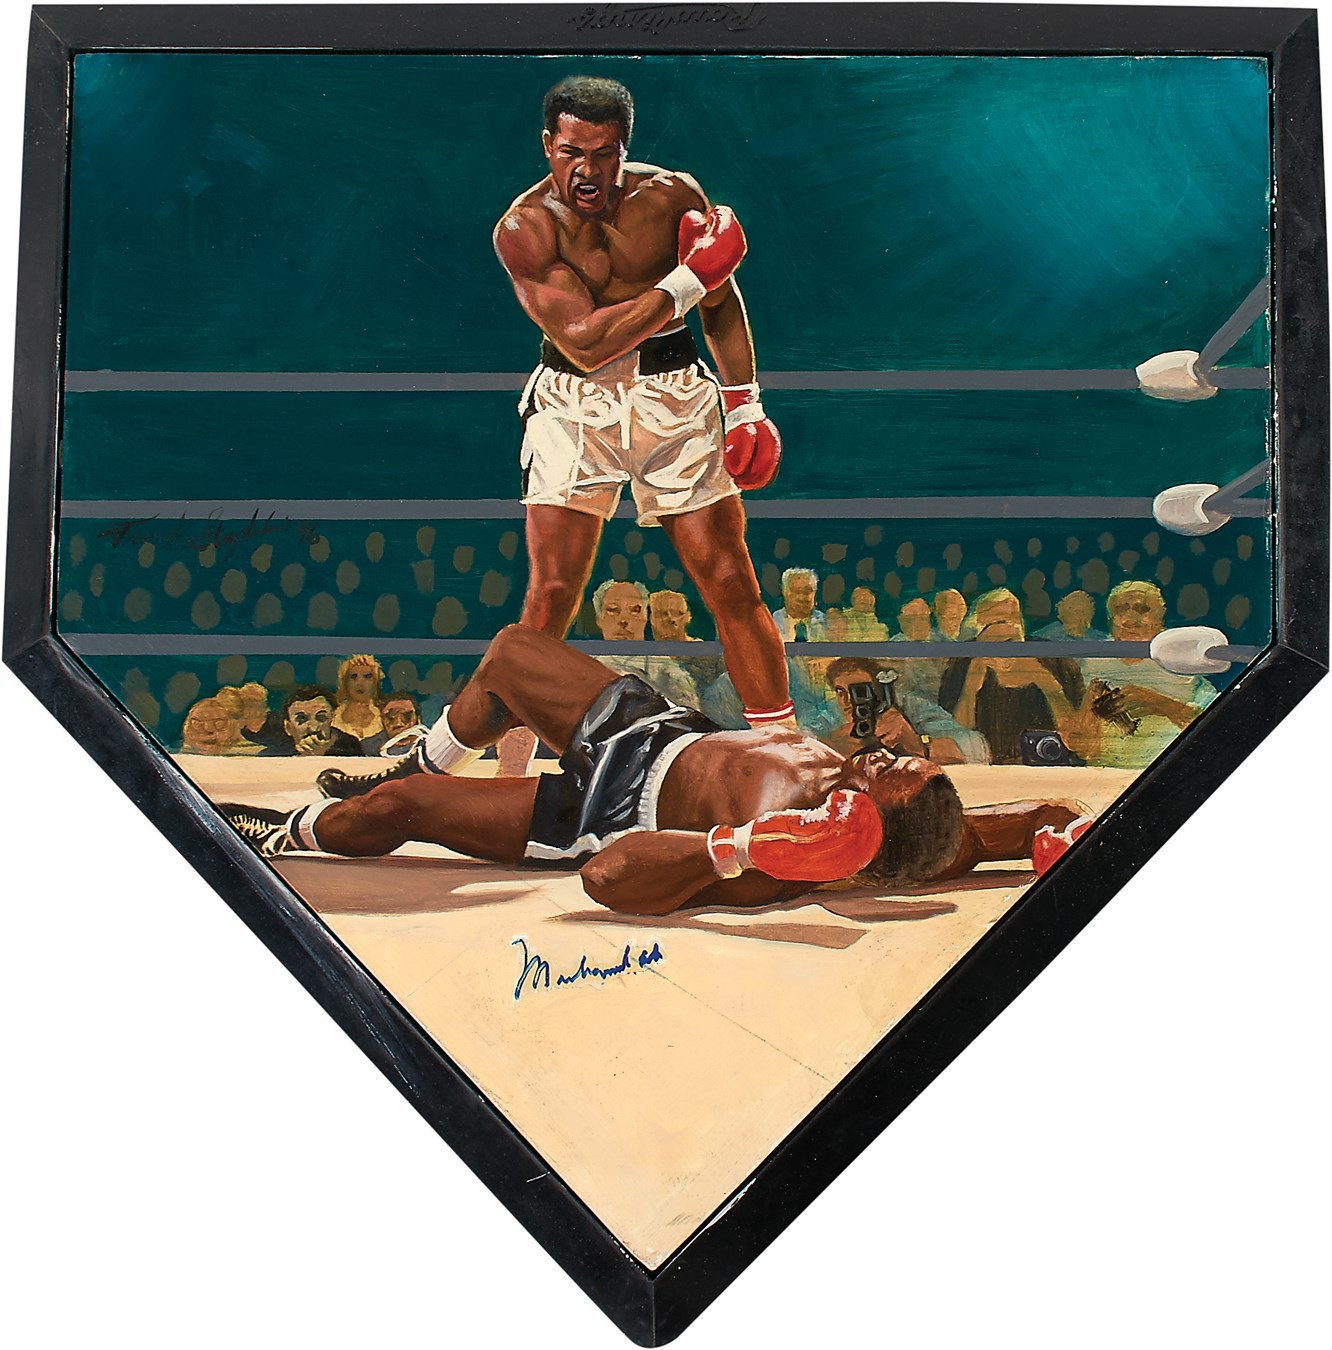 - Classic Ali vs. Liston Oil Painting on Home Plate Signed by Muhammad Ali (JSA LOA)